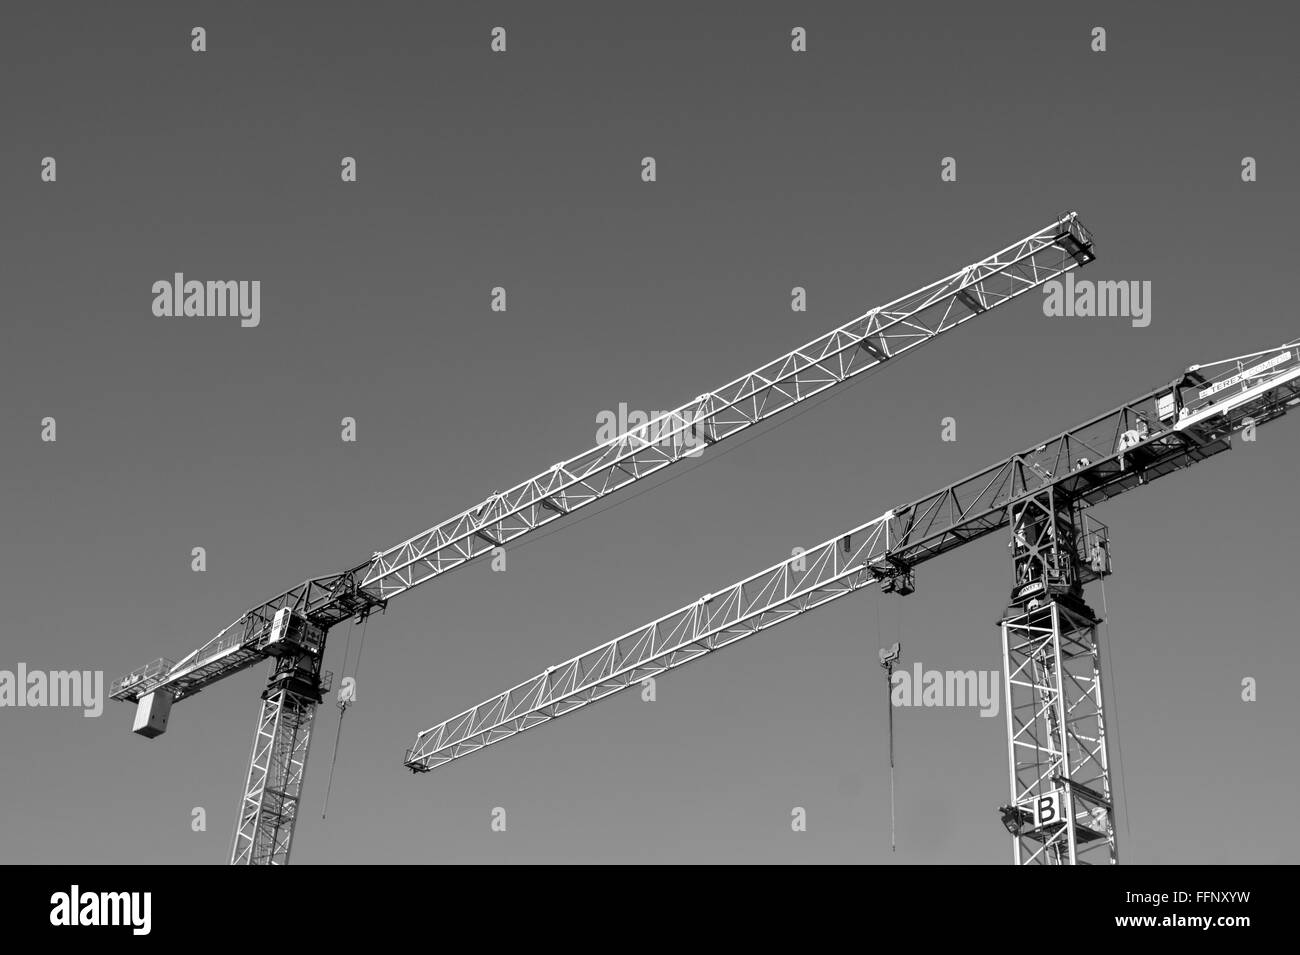 Black and white image of two tower construction cranes pointing in opposite directions against a clear sky Stock Photo